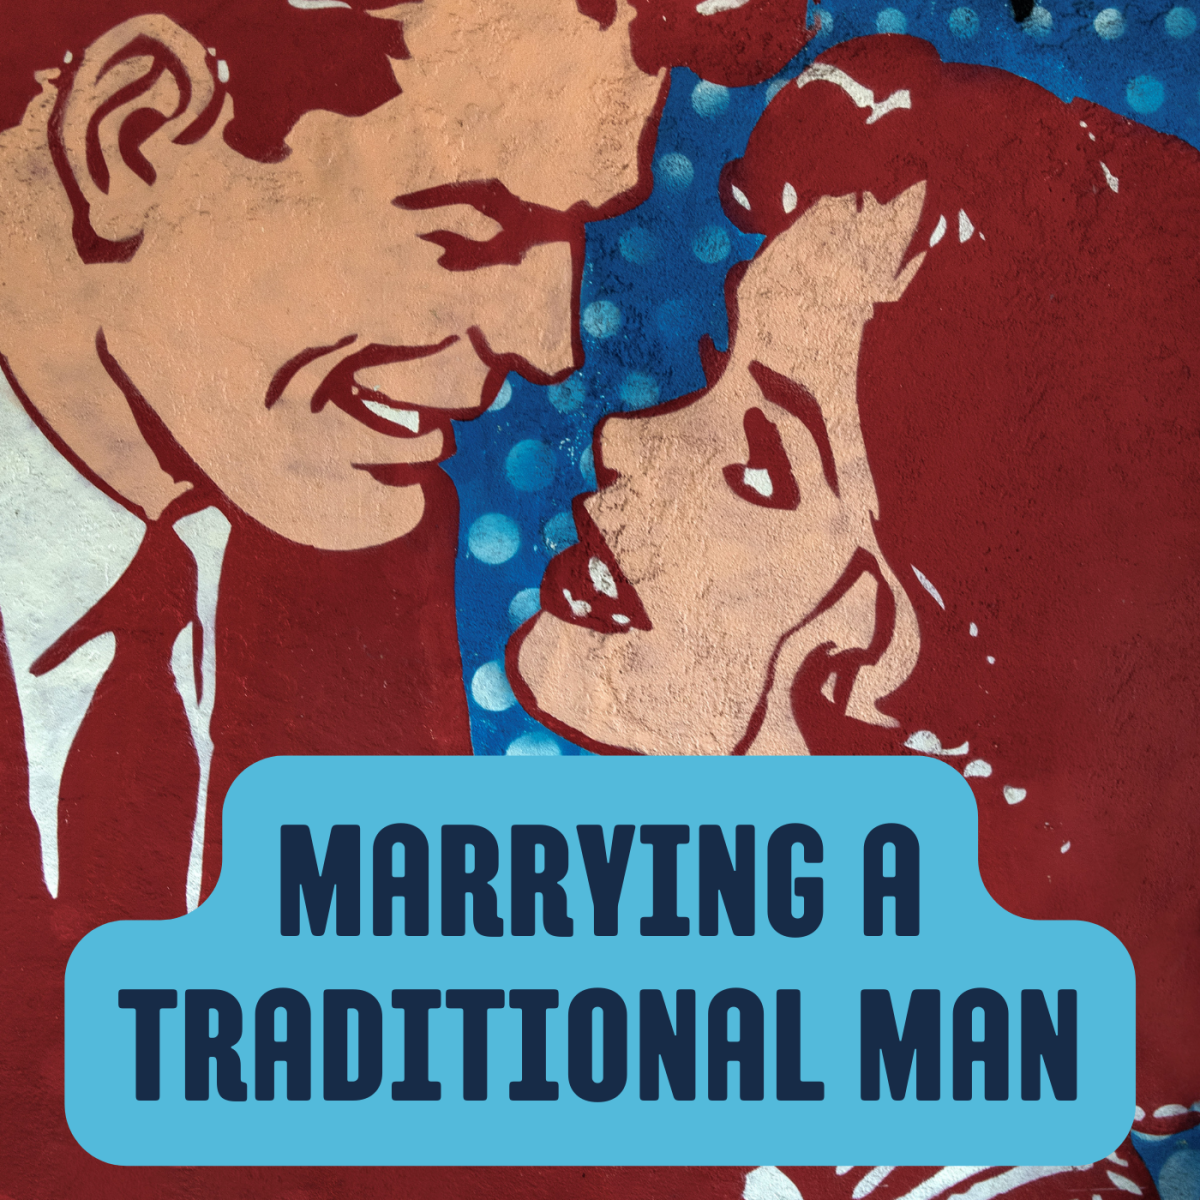 Why Traditional Men Make the Best Husbands